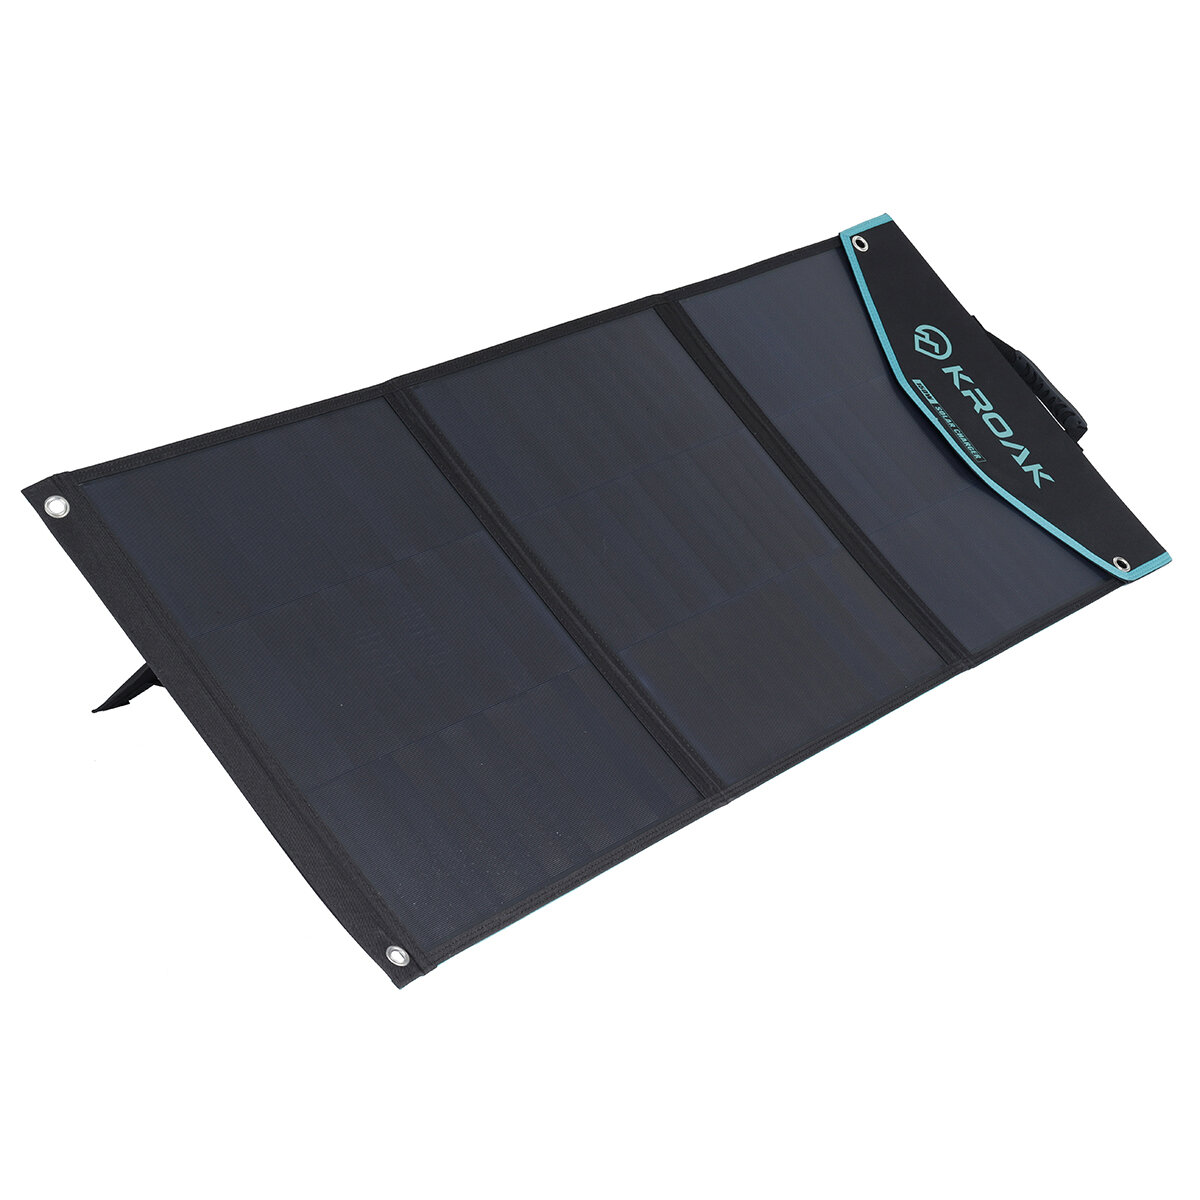 Kroak k-sp05 150w 19.8v foldable shingled solar panel outdoor waterproof portable superior monocrystalline solar power cell battery charger for car camping phone